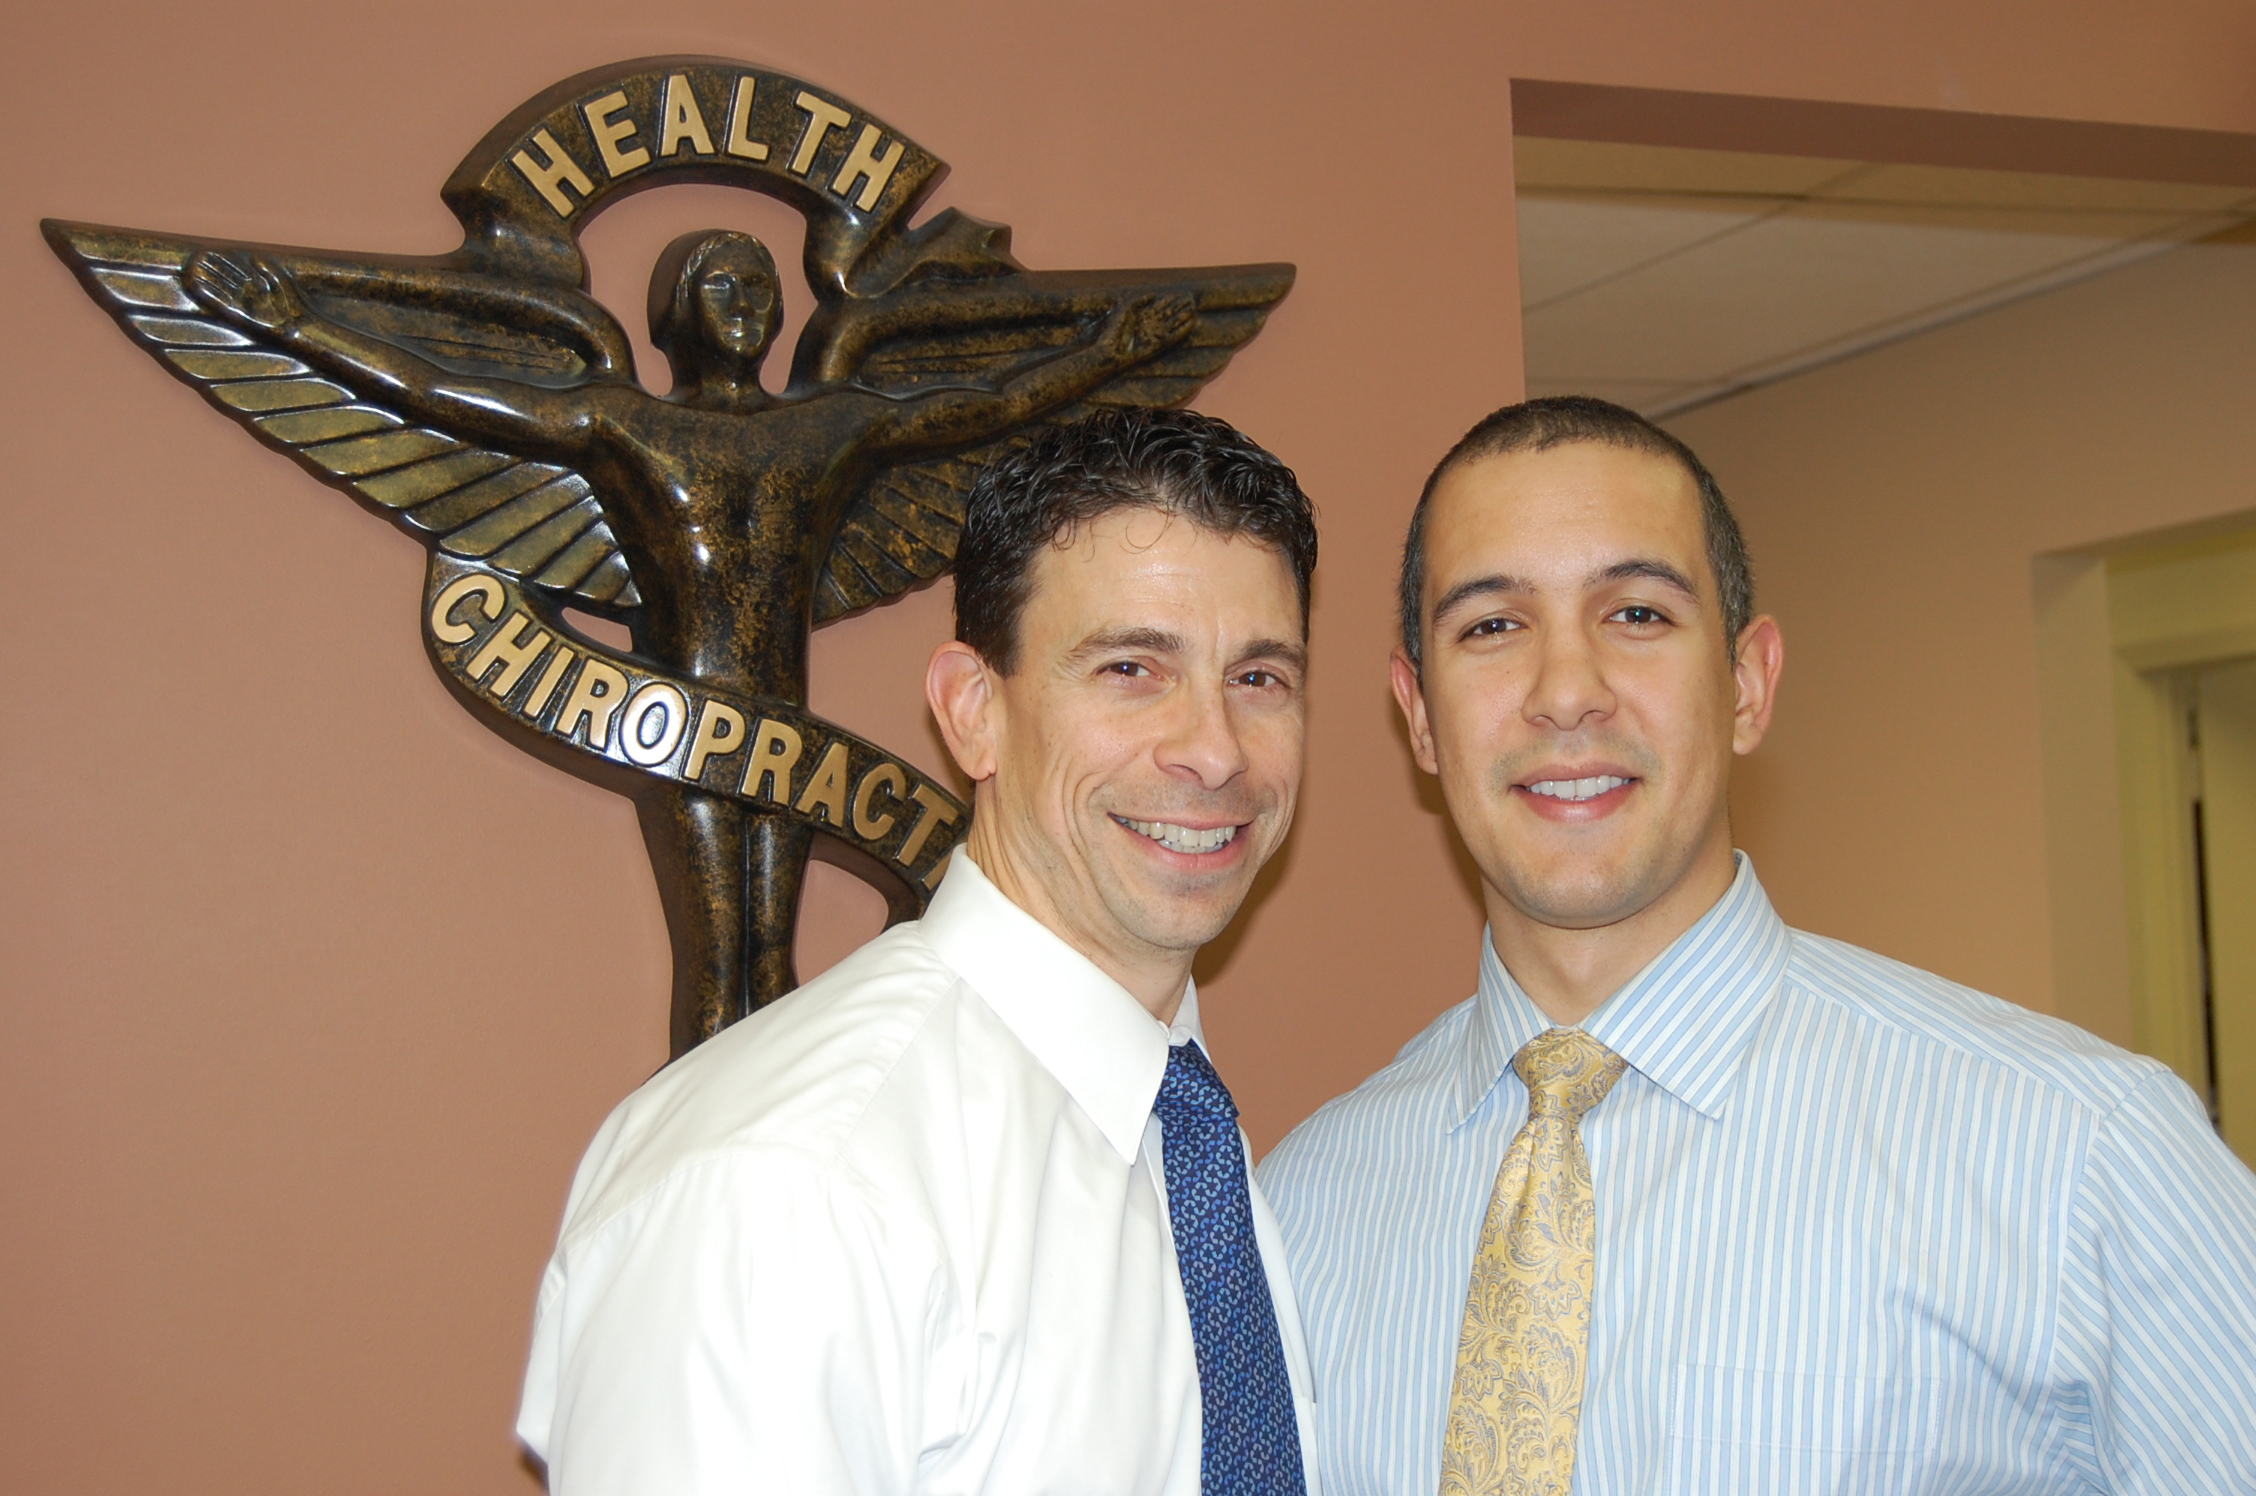 Dr. Michael Cocilovo and Dr. Gil Rodriguez of New City Chiropractic Center